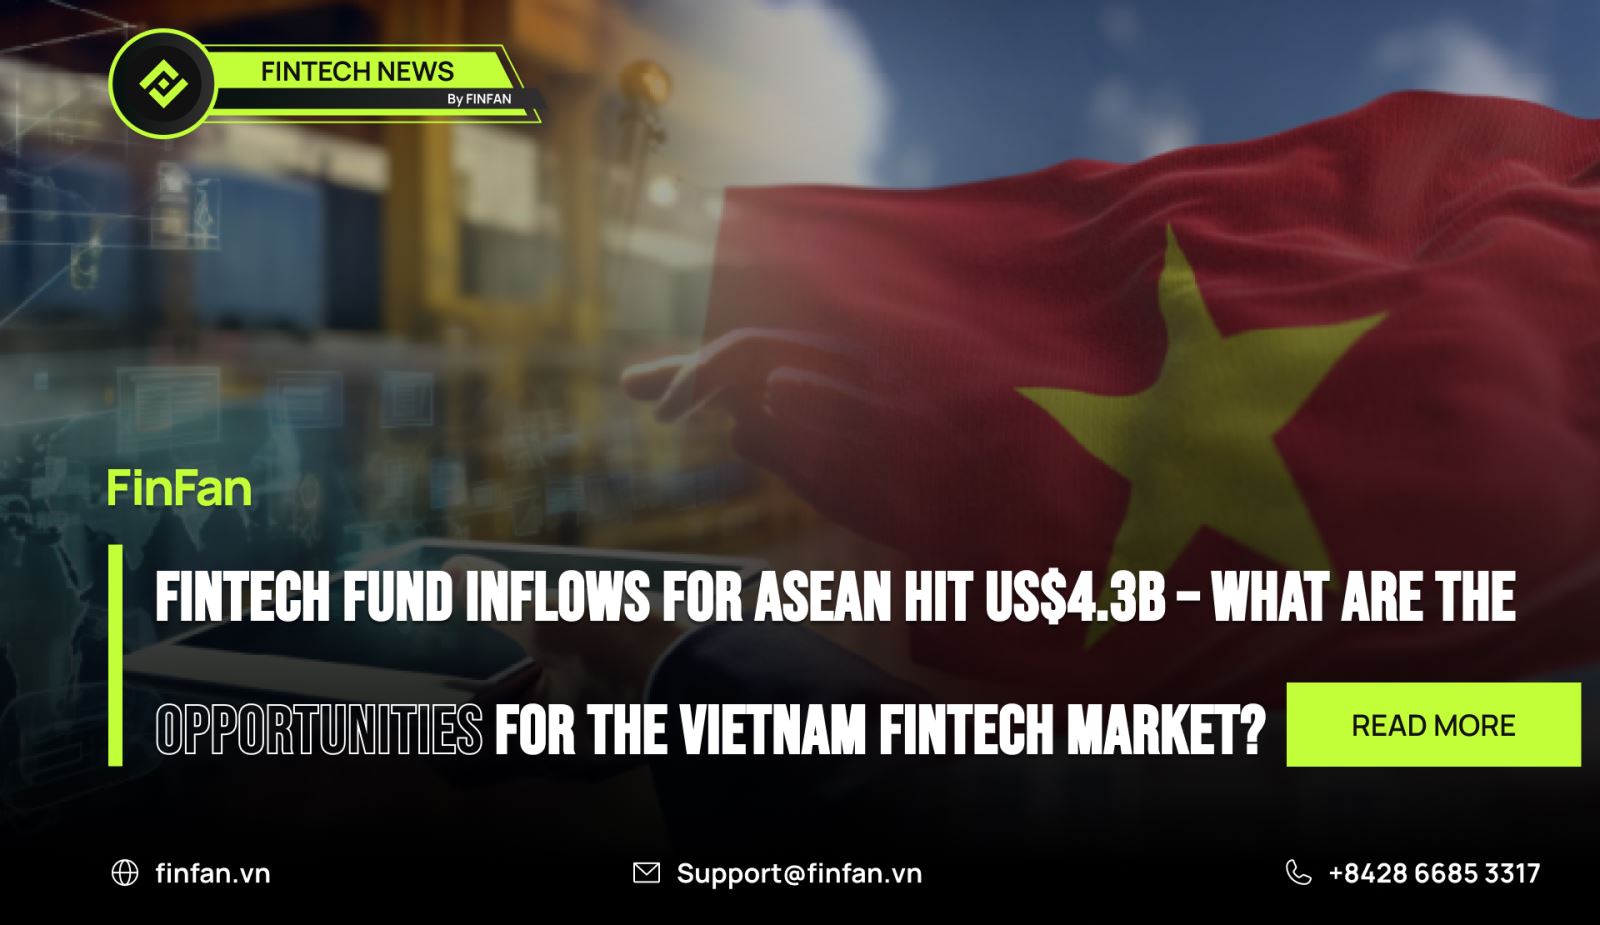 Fintech fund inflows for Asean hit US$4.3b – What are the opportunities for the Vietnam fintech market?